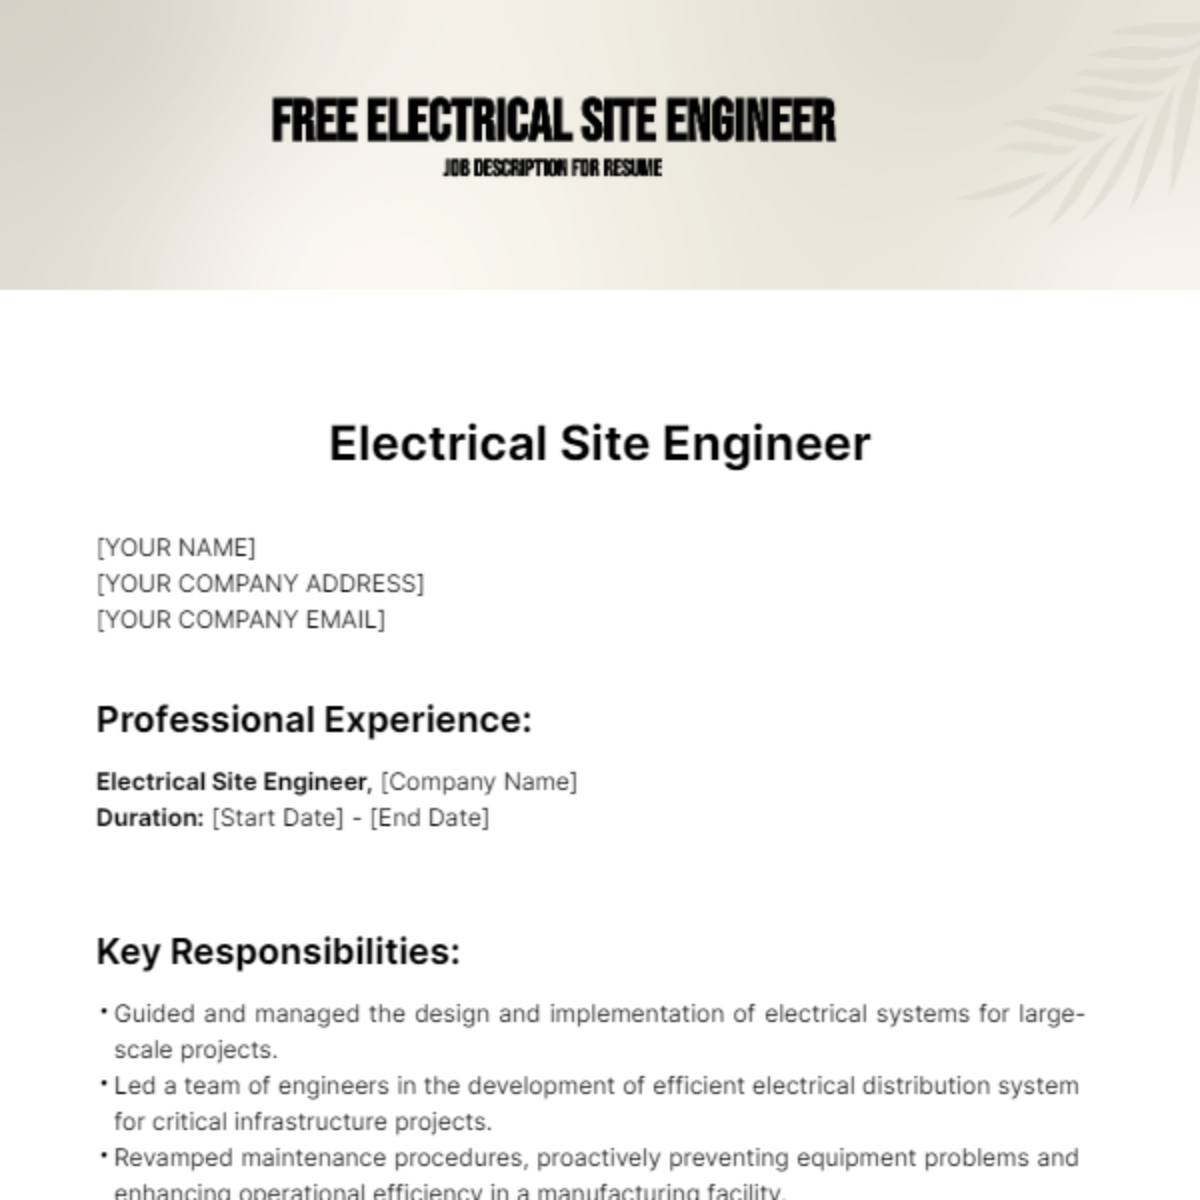 Electrical Site Engineer Job Description for Resume Template